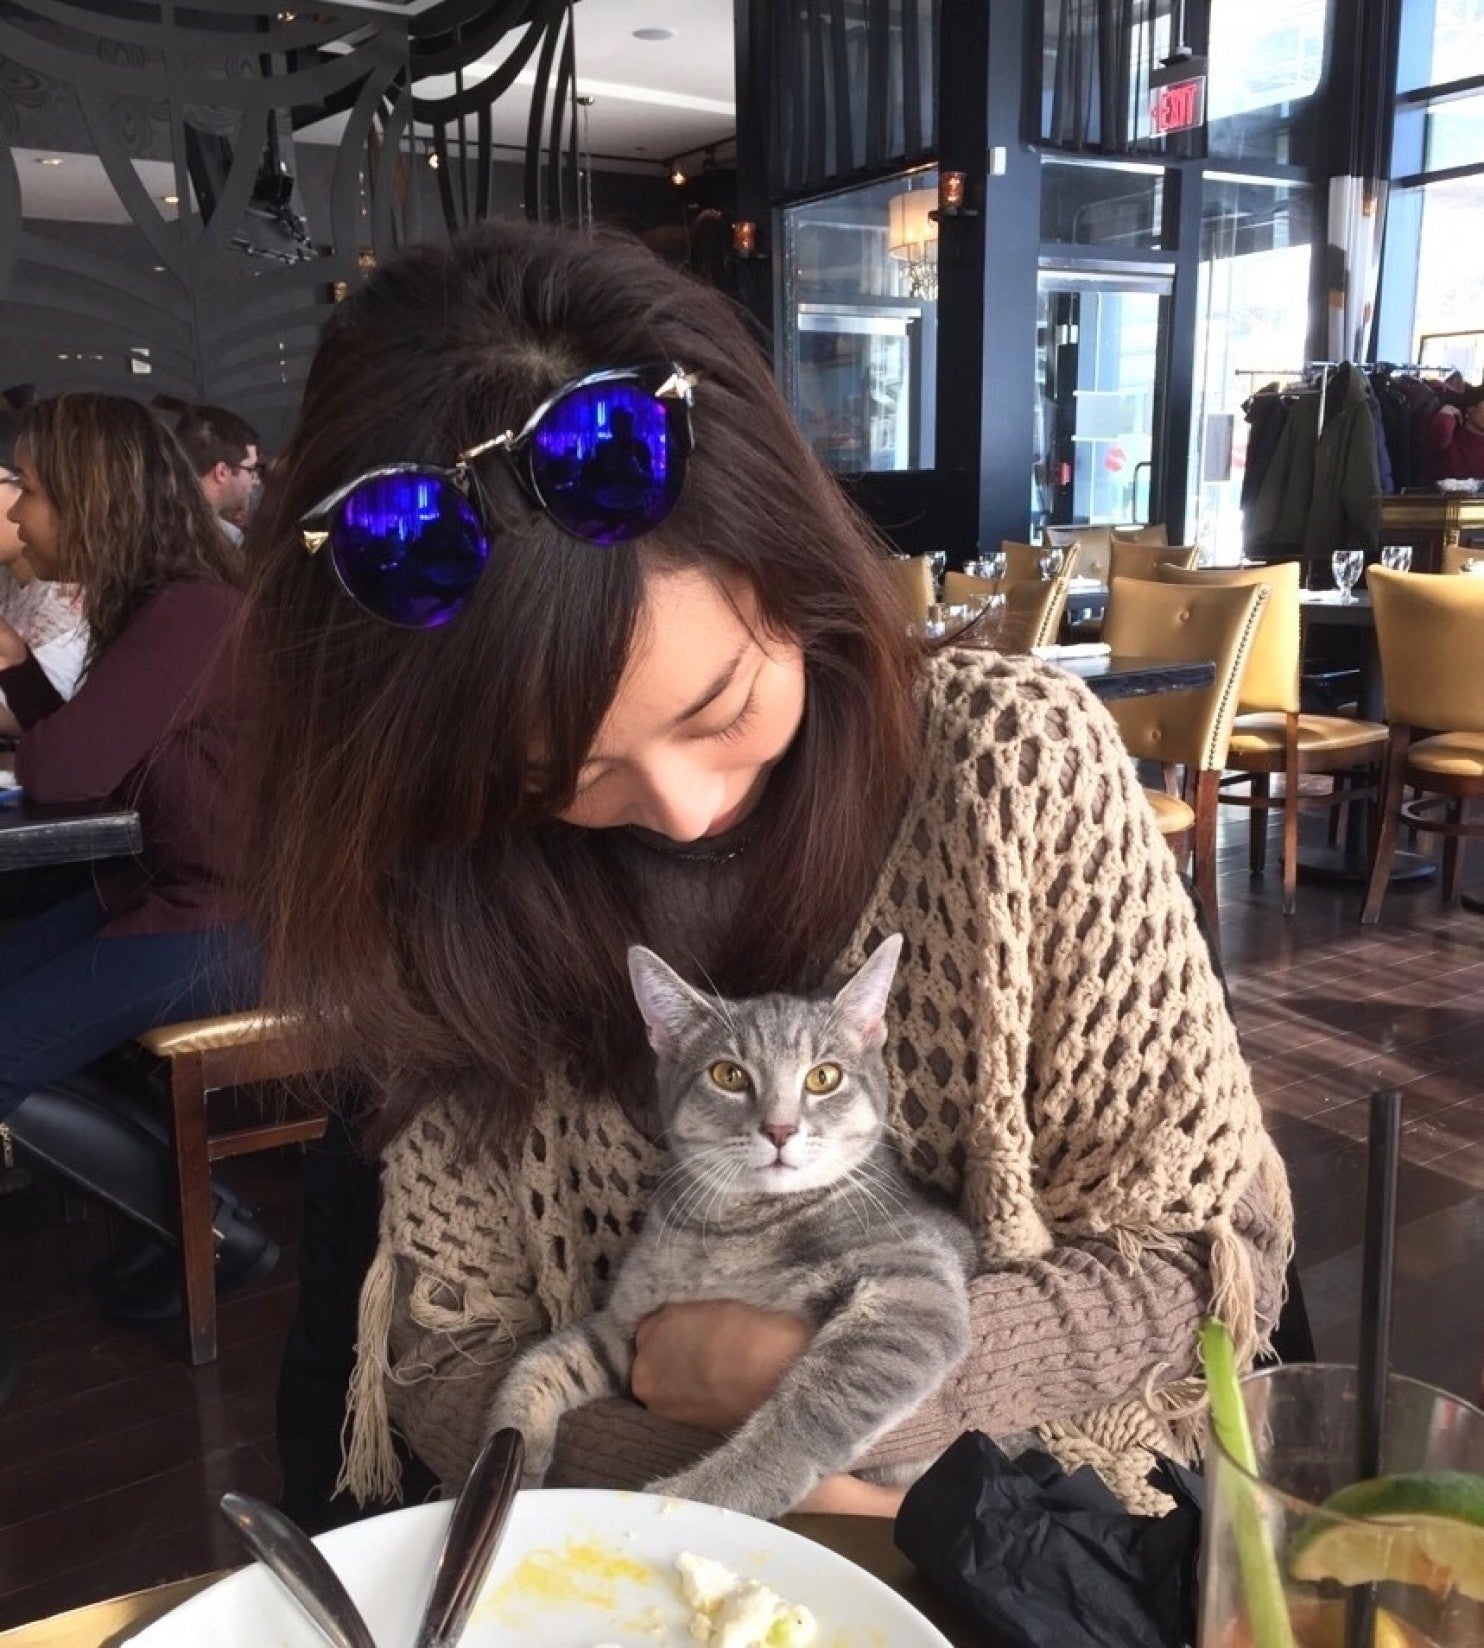 Jee Lee likes to take two-year-old Hanuri to brunch